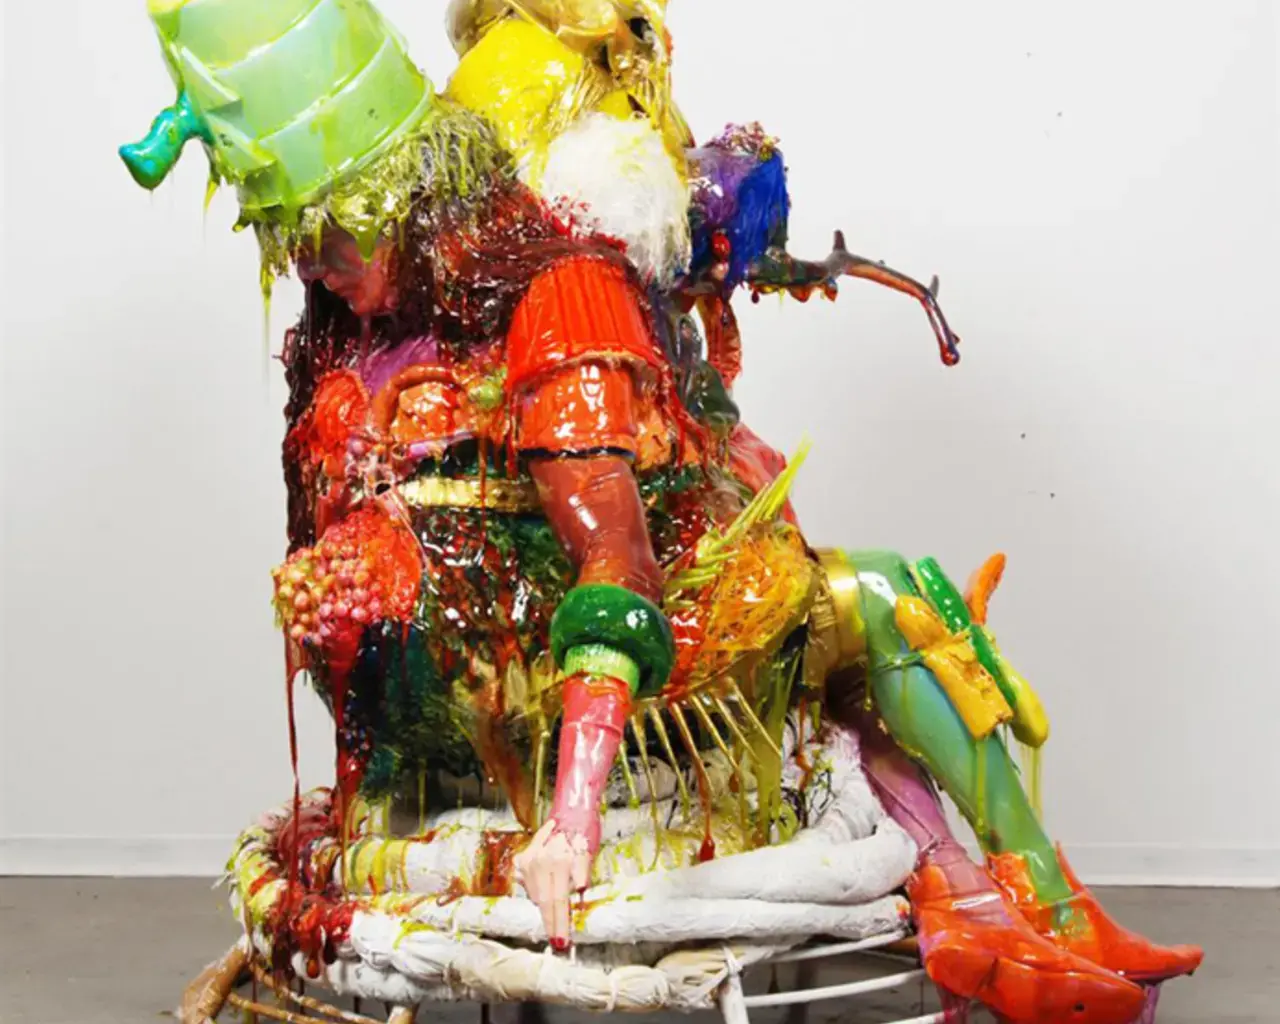 Alex Da Corte, Modern Girl, 2010. Fiberglass cast figure collaged with objects and painted with distilled soda pop, 55 x 68 x 52. Photo courtesy of the artist.